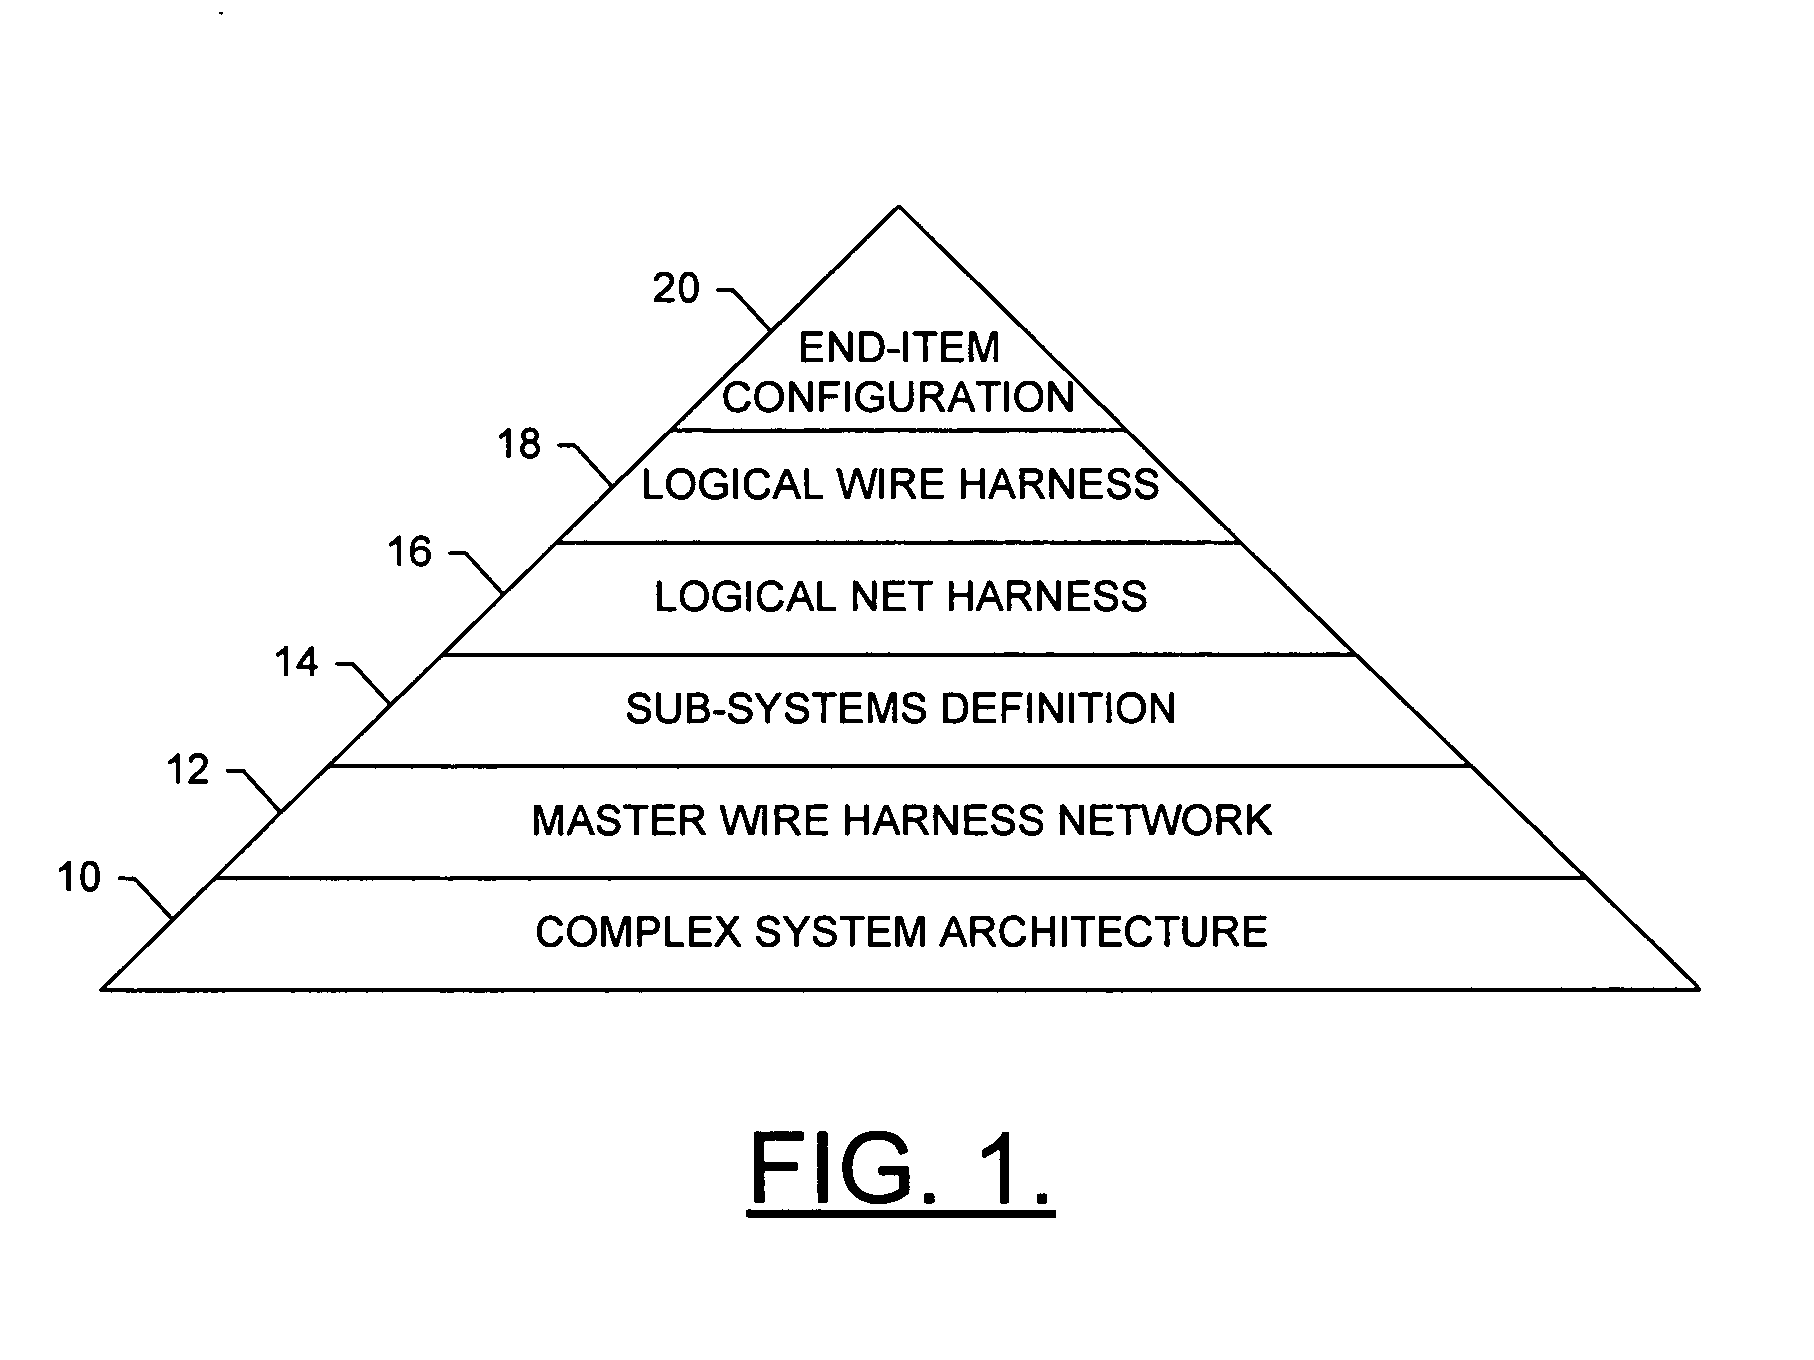 Topology-driven apparatus, method and computer program product for developing a wiring design